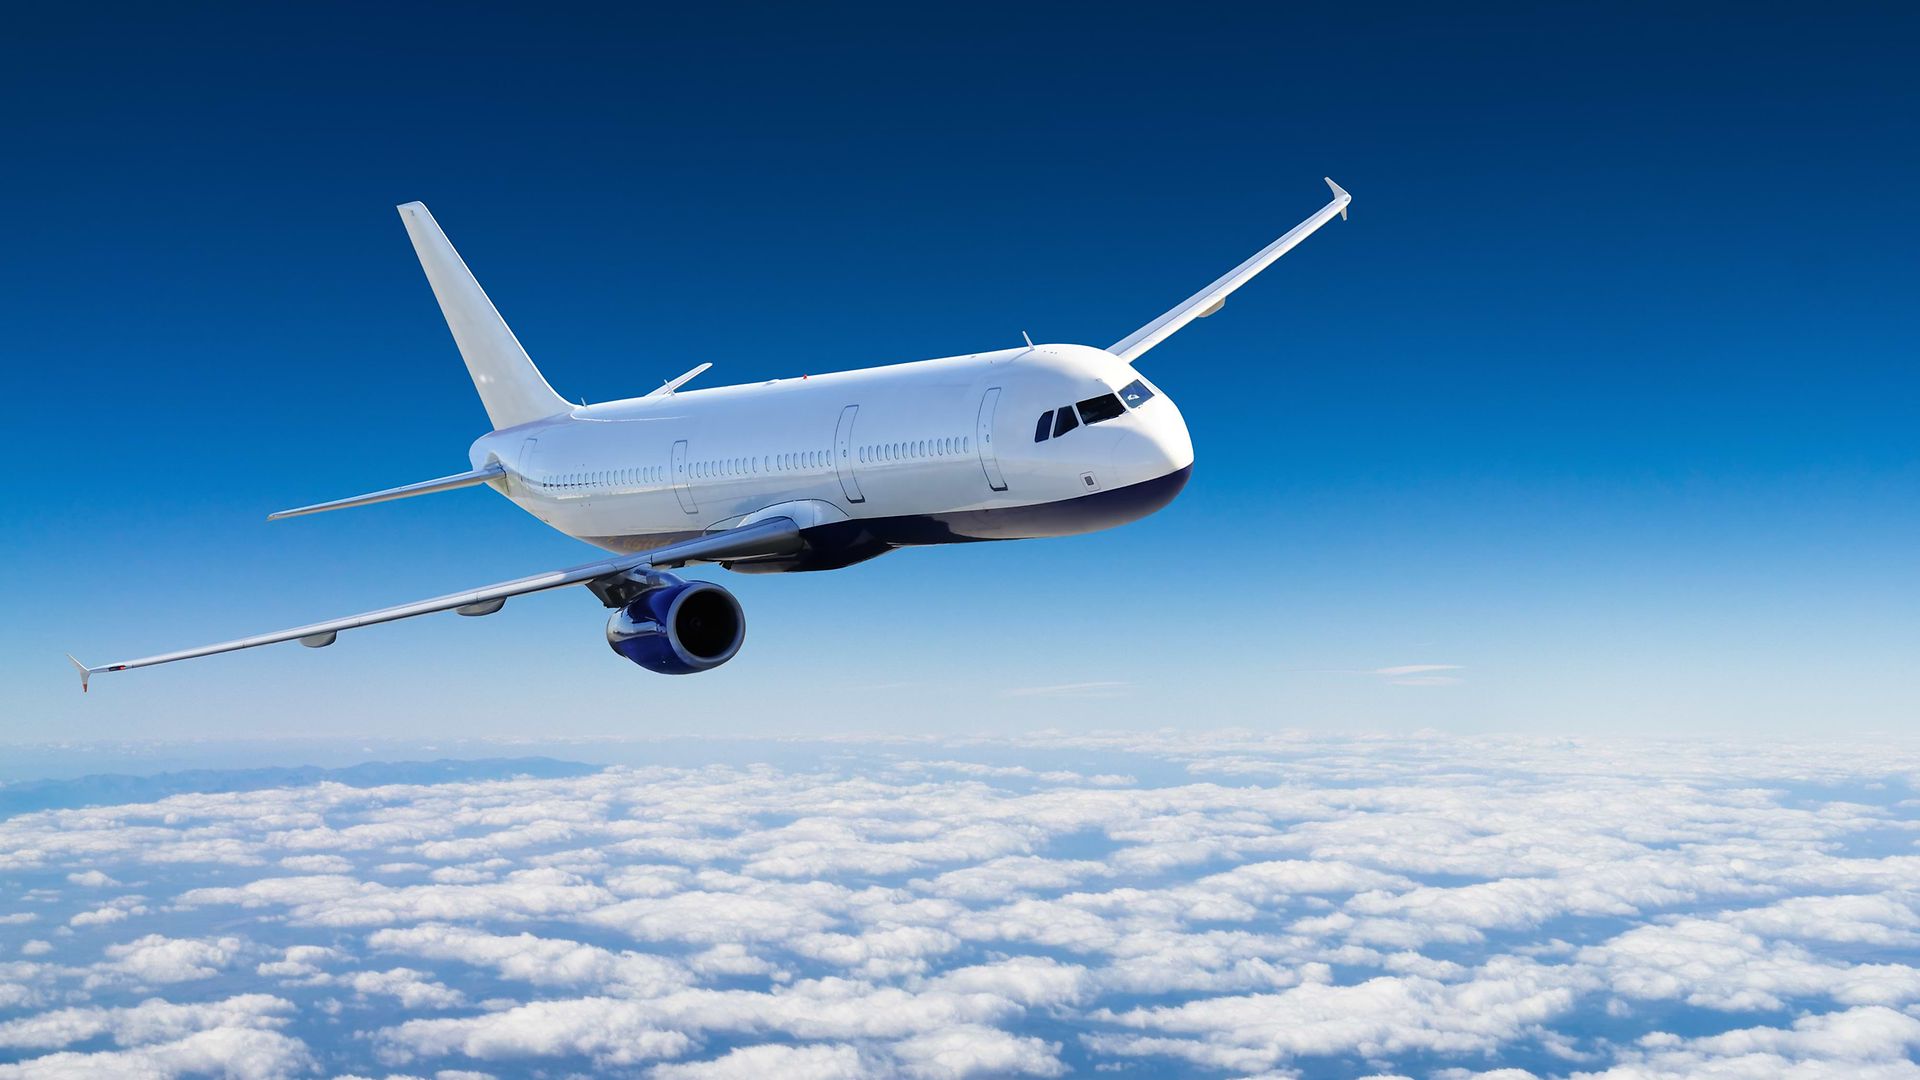 Game-changing trends are accelerating growth in the aerospace industry